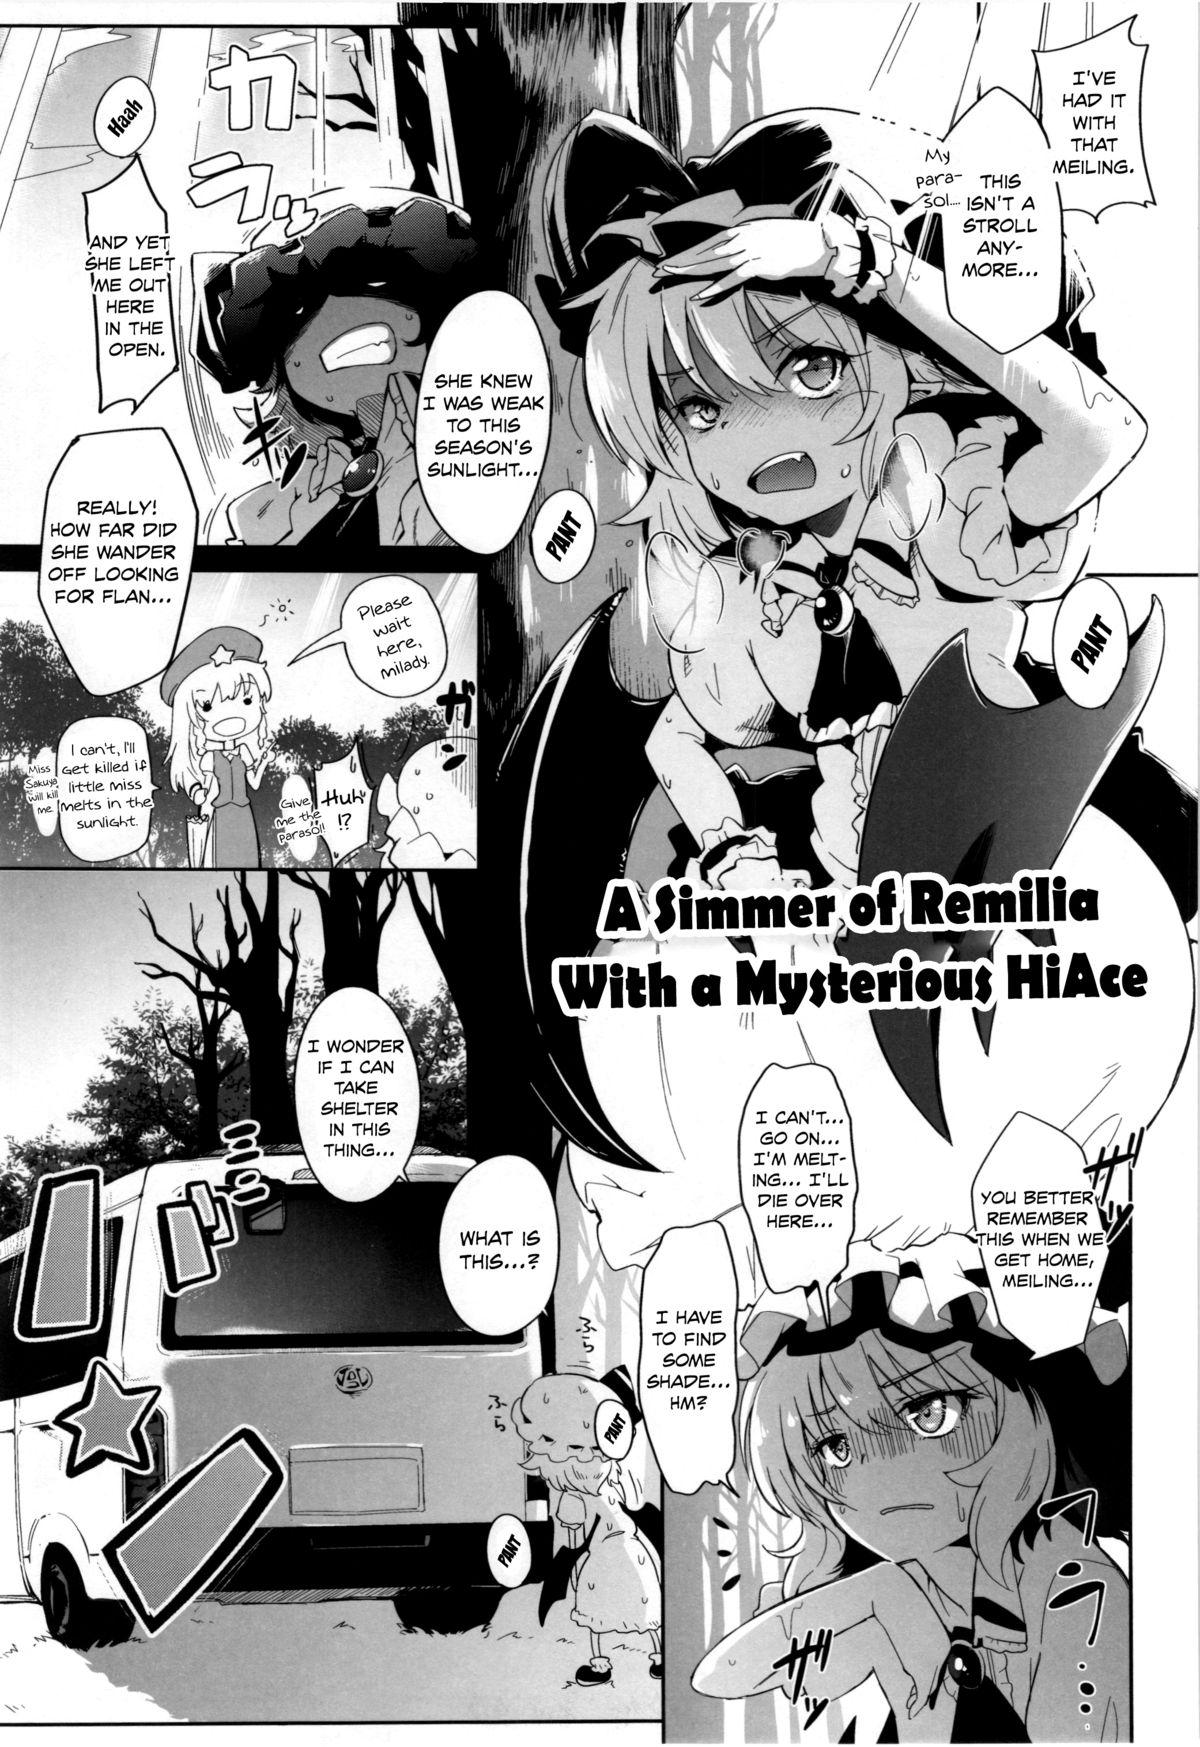 Tit Remilia to Fushigi no HiAce | A Simmer of Remilia With a Mysterious HiAce - Touhou project Coed - Page 1